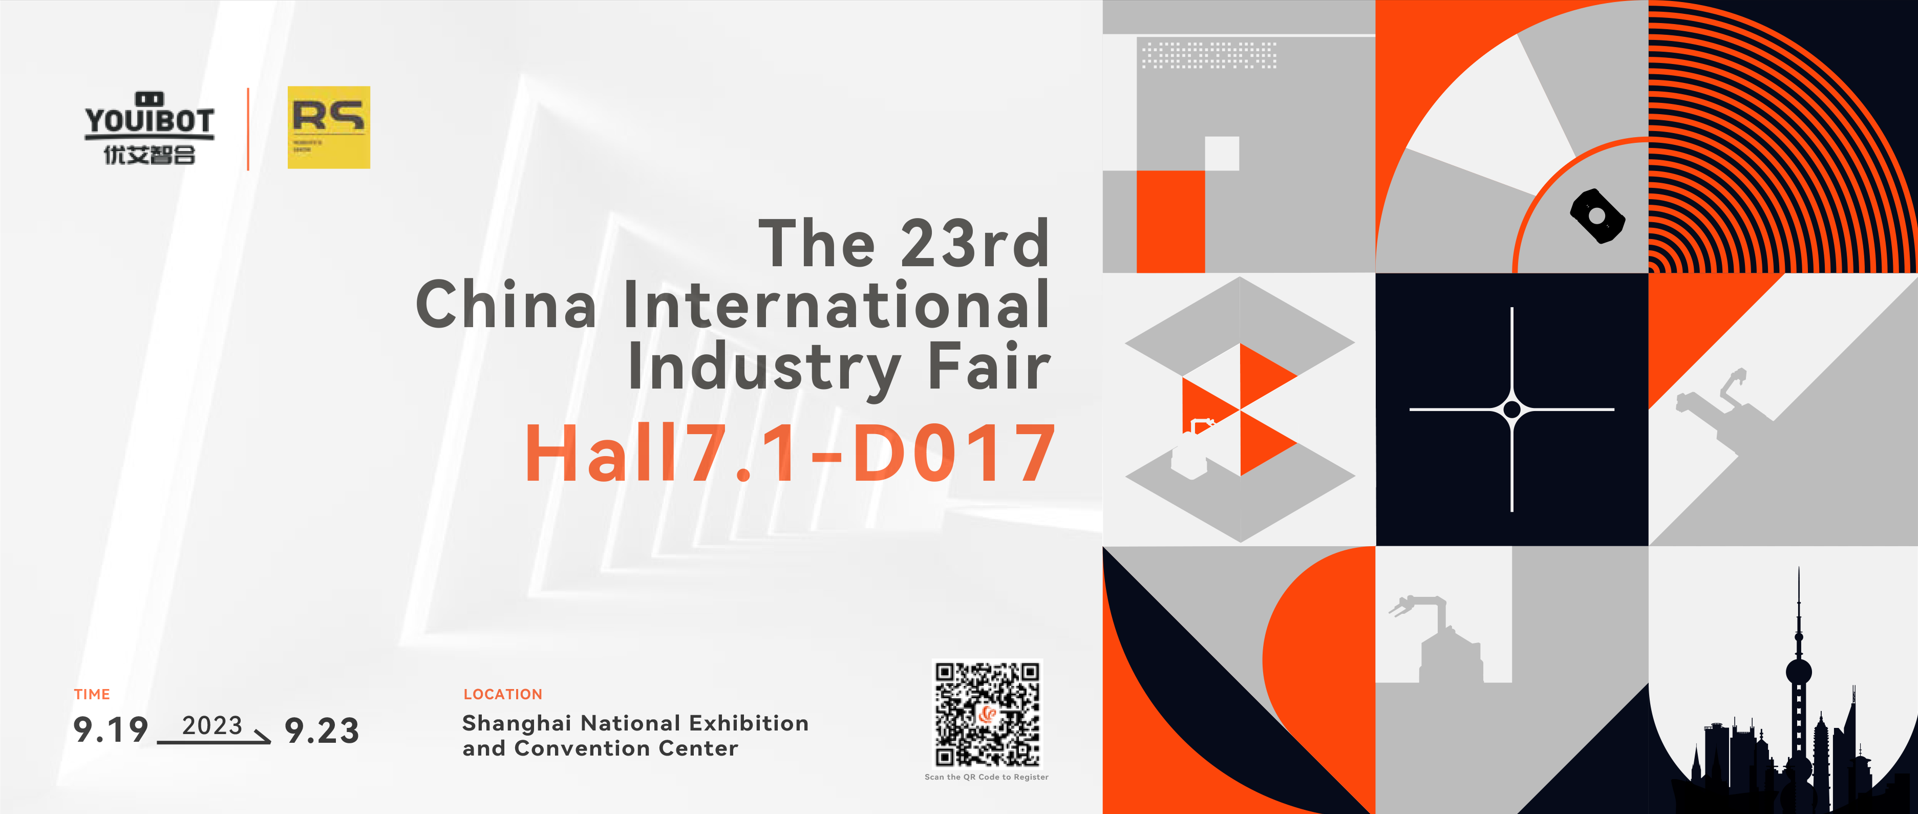 China International Industry Fair 2023, Here We Come!